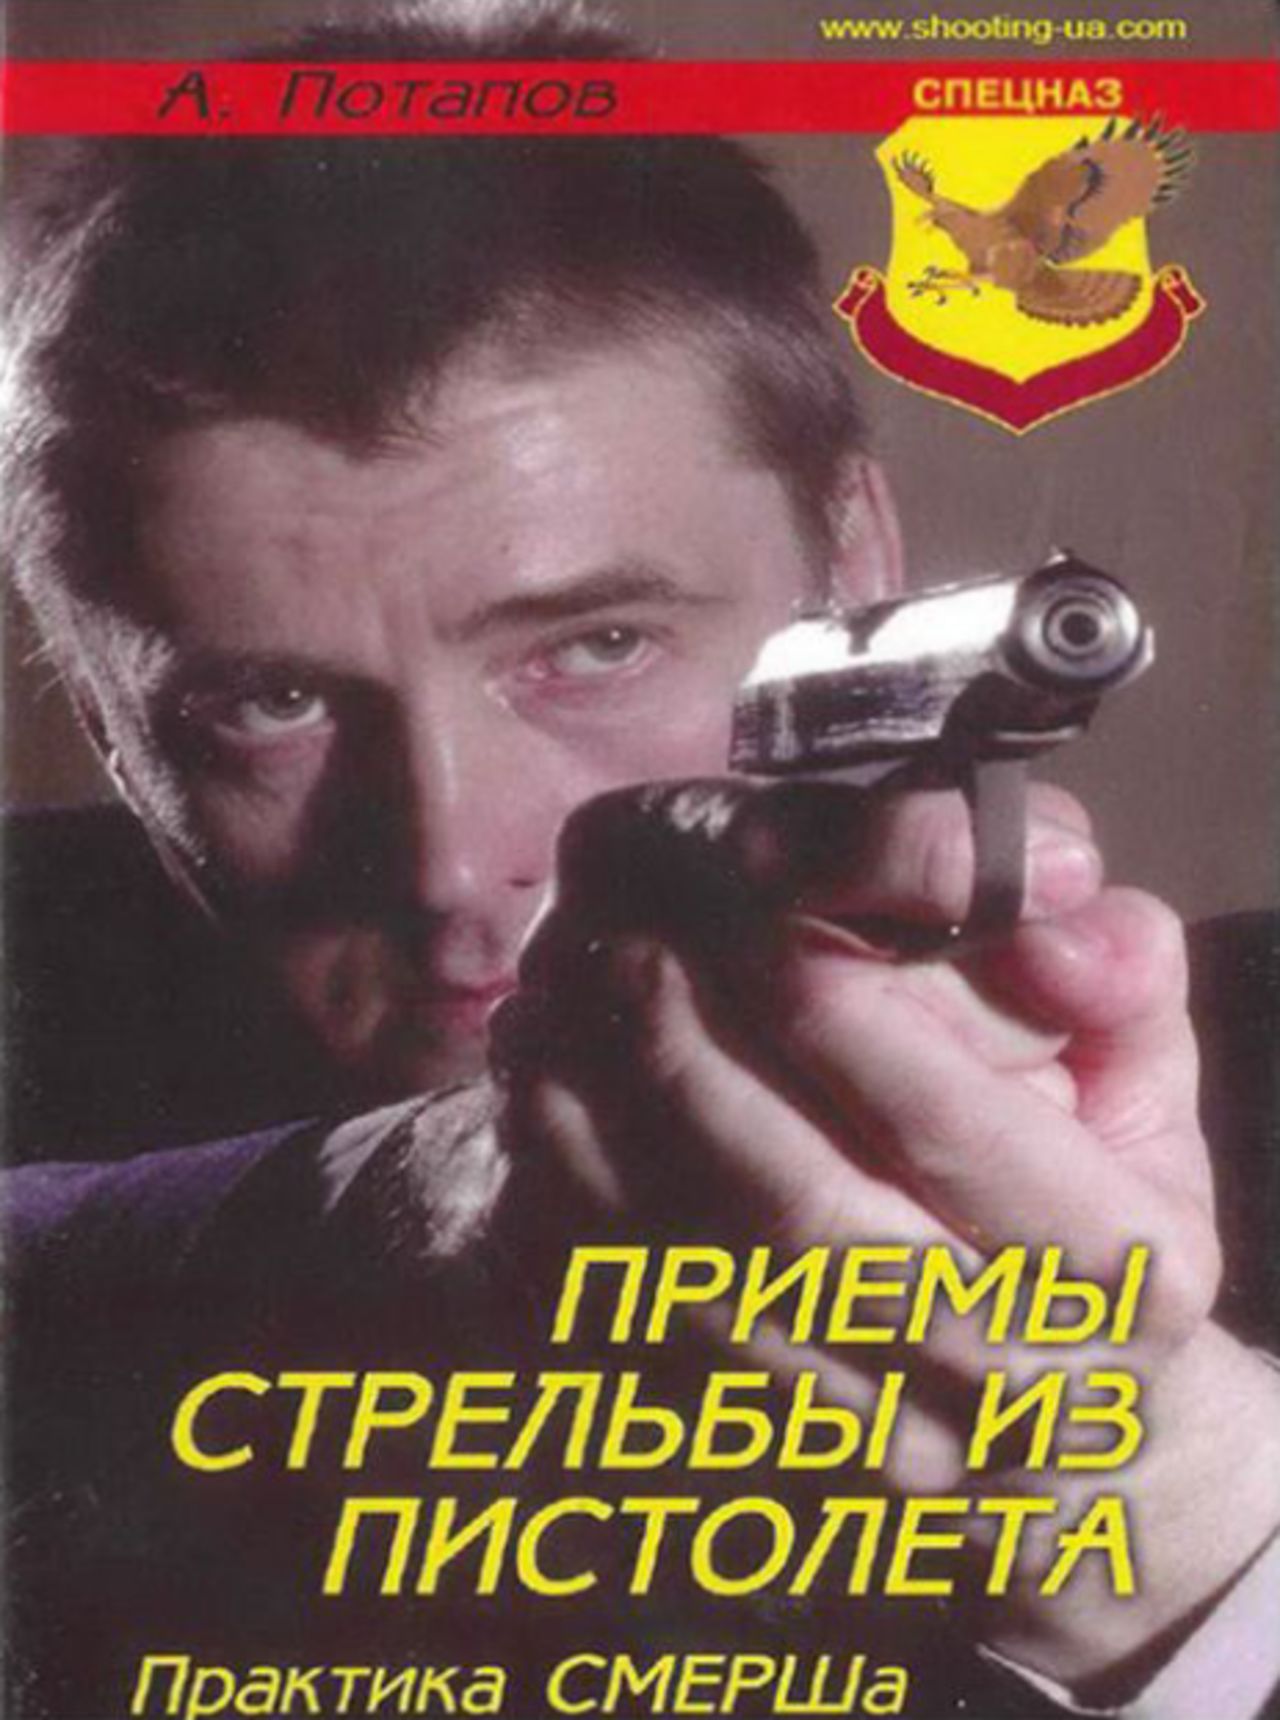 This Russian manual on how to fire a handgun was found in the apartment where Tsarnaev's brother, Tamerlan, lived. Tamerlan Tsarnaev was killed in a shootout with police in Watertown, Massachusetts, on April 19, 2013.